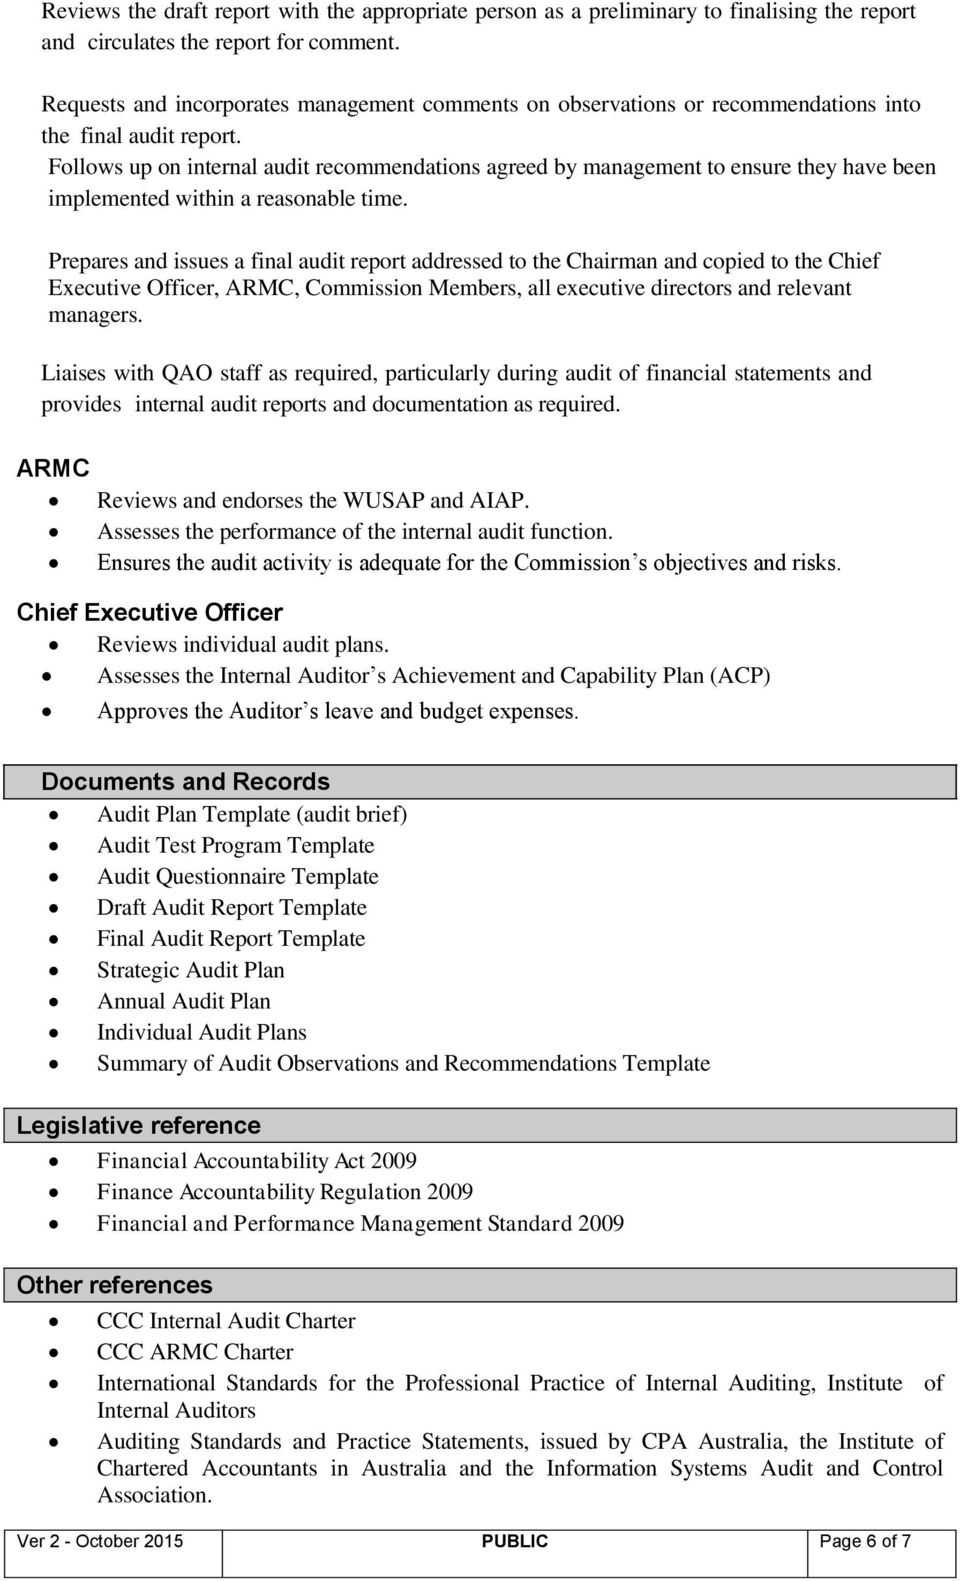 Sample Internal Audit Report Executive Summary With Internal Control Audit Report Template